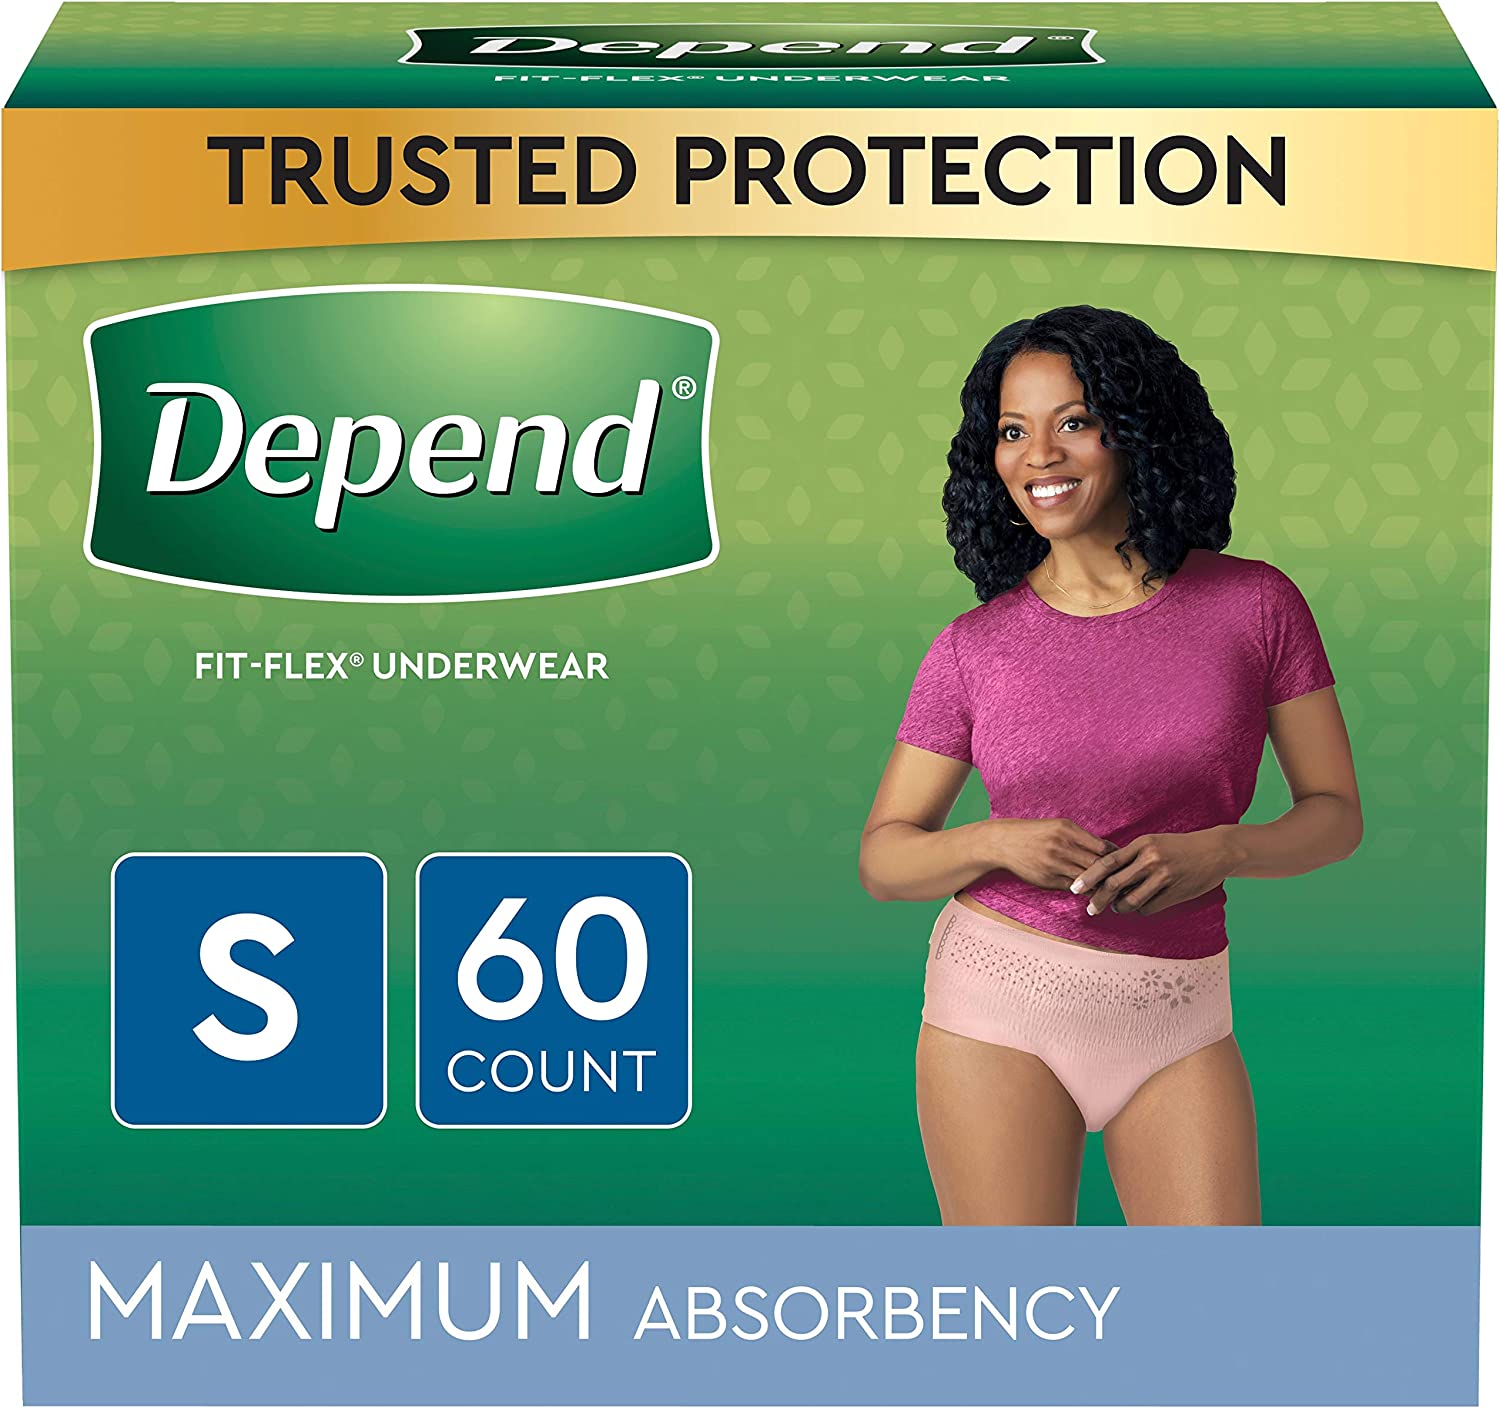 Manage BLEEDING AFTER BIRTH with adult diapers {ALWAYS vs DEPENDS